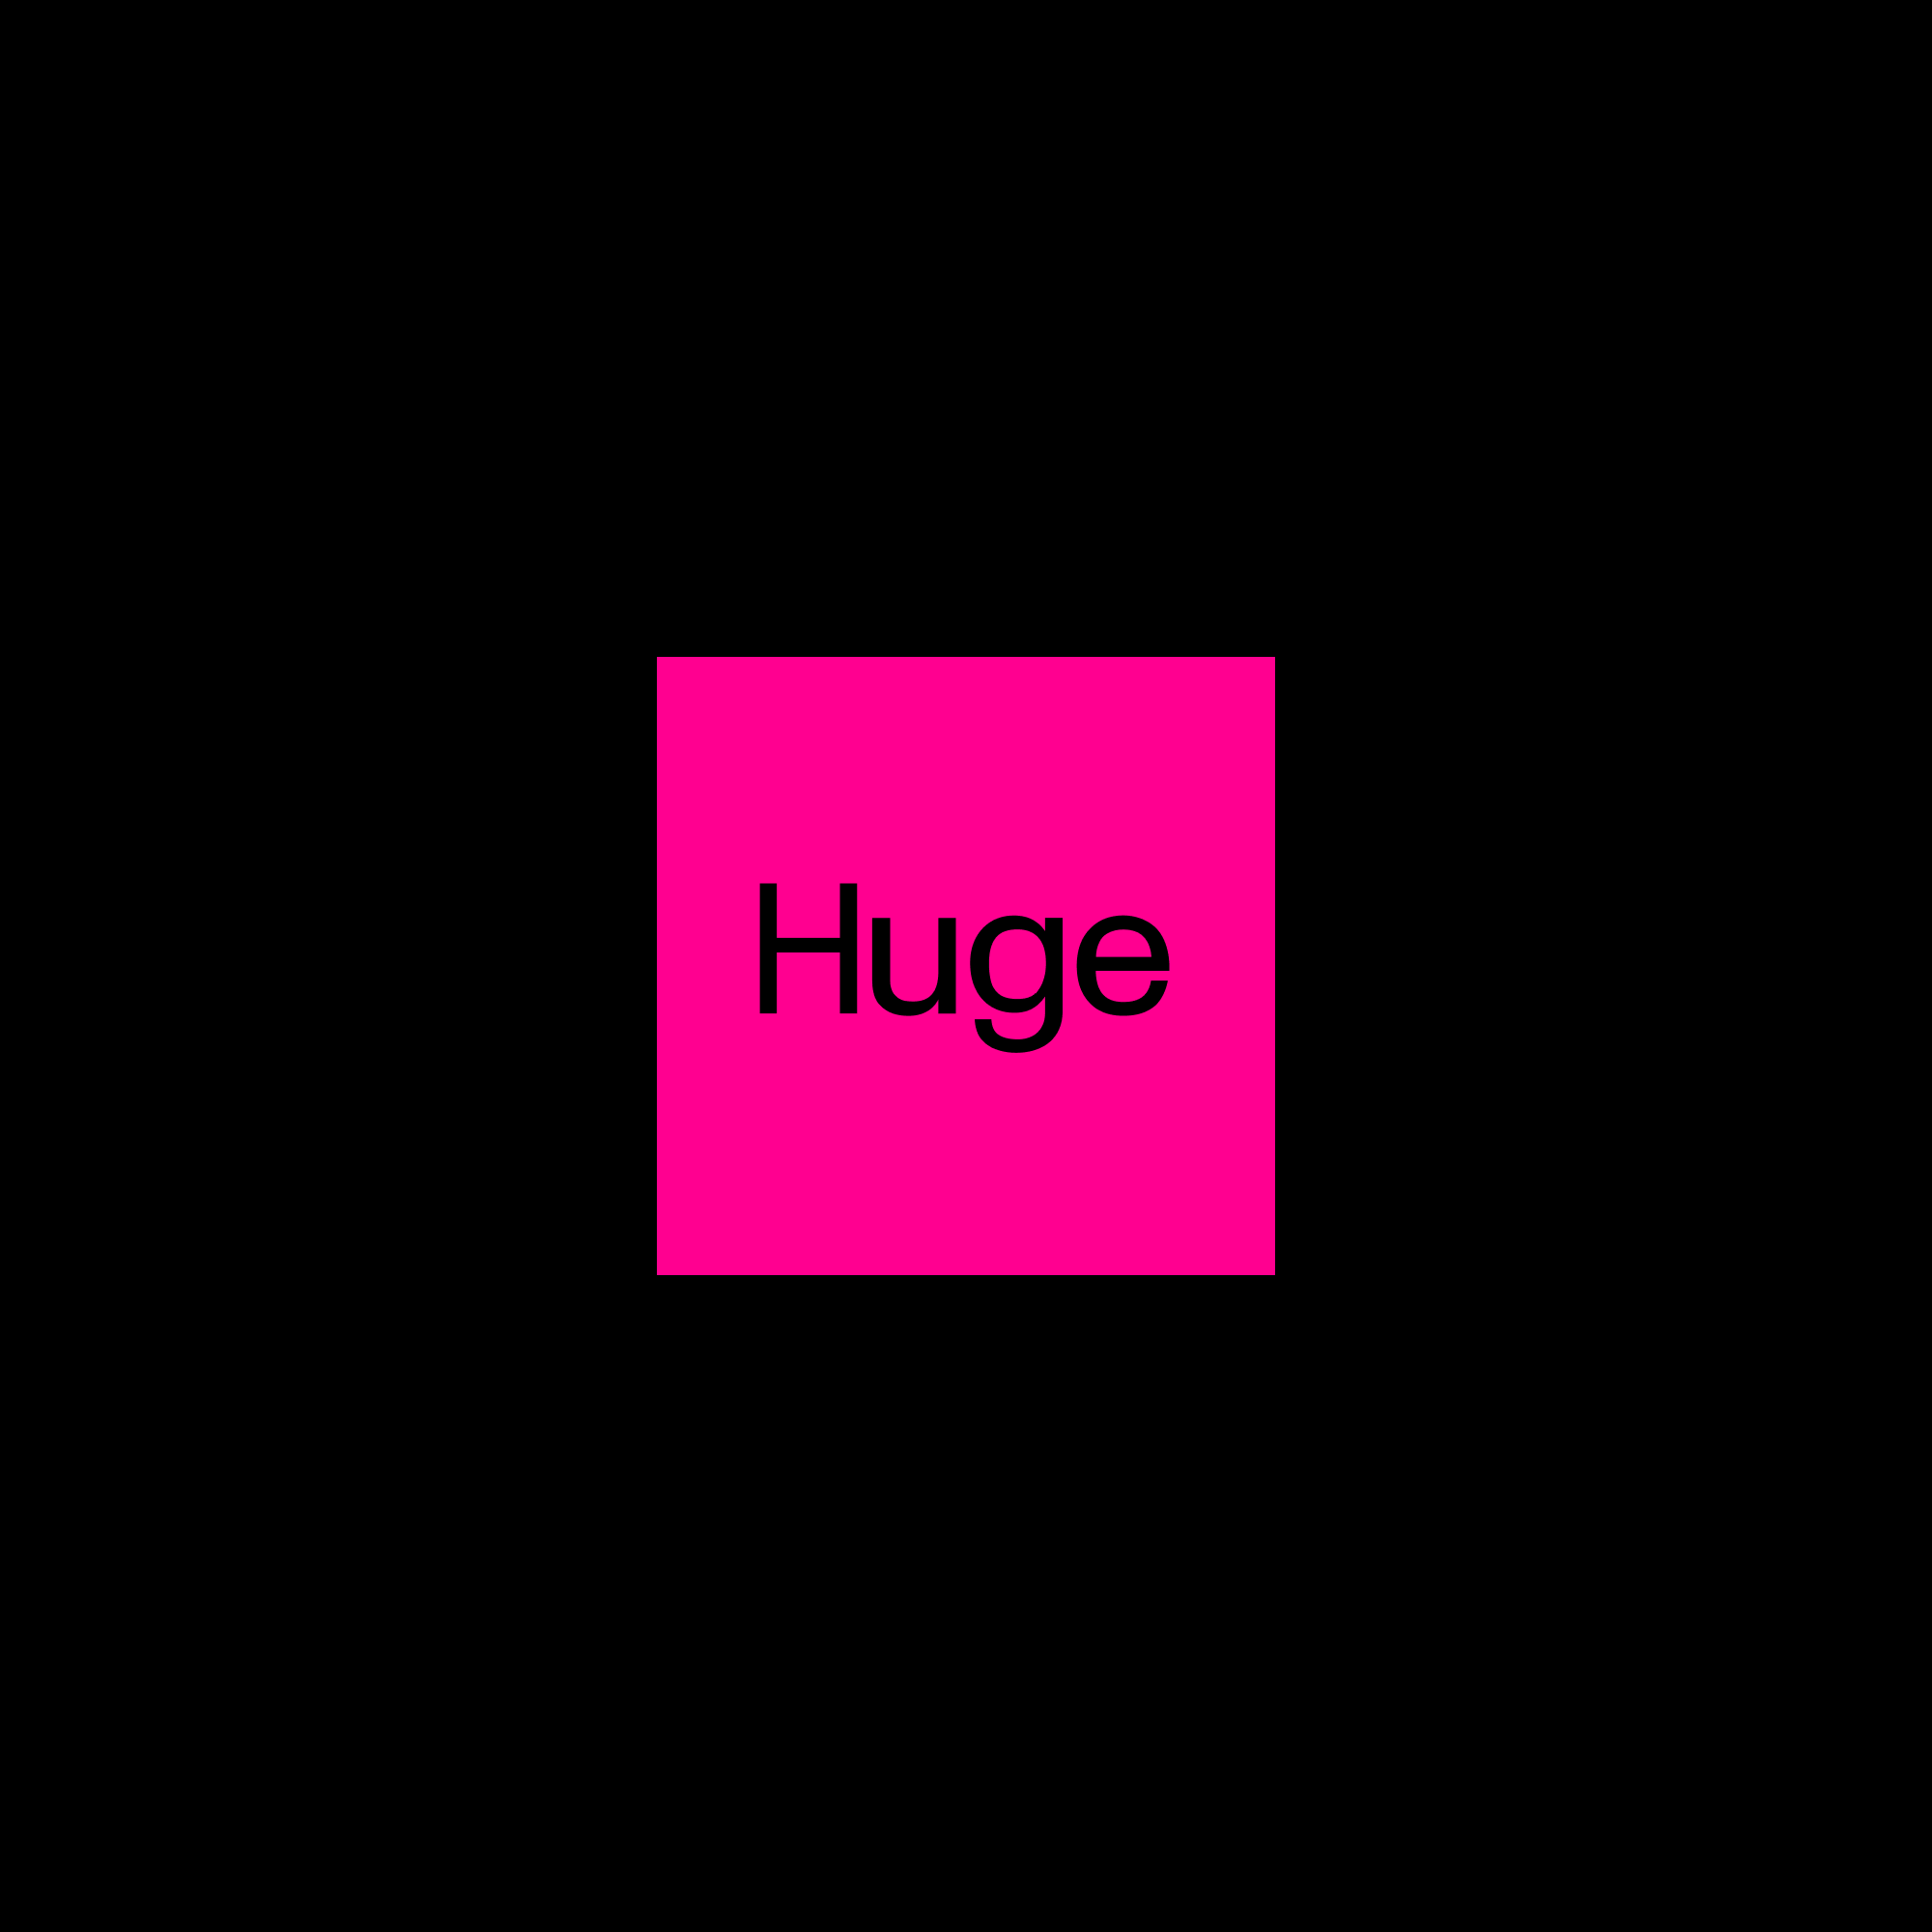 Products | Huge Inc.